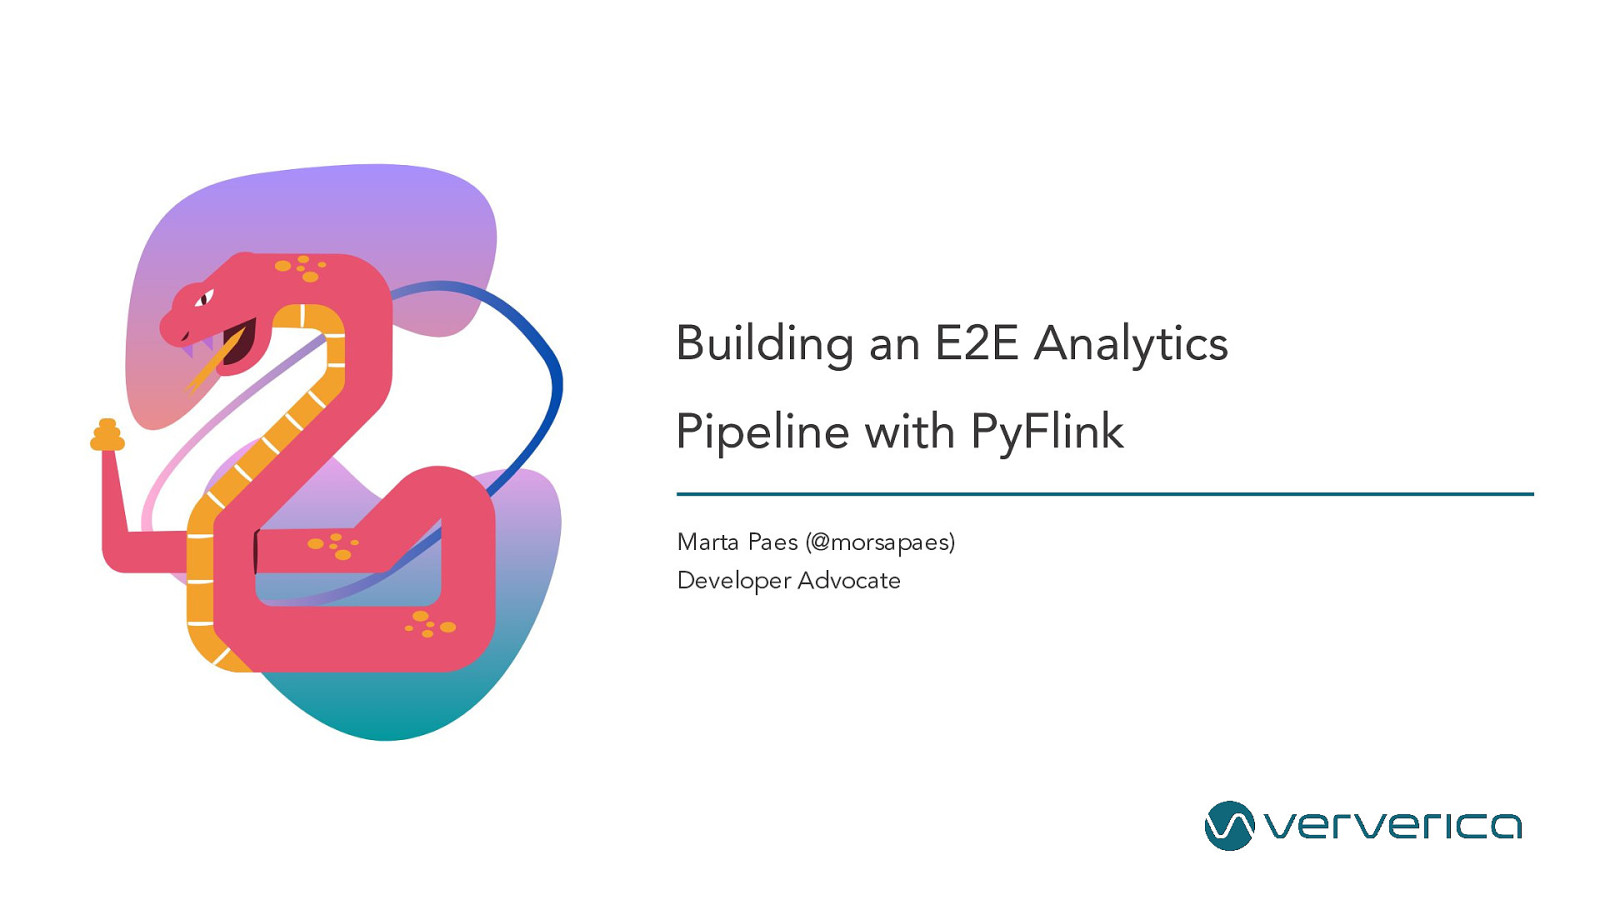 Building an End-to-End Analytics Pipeline with PyFlink